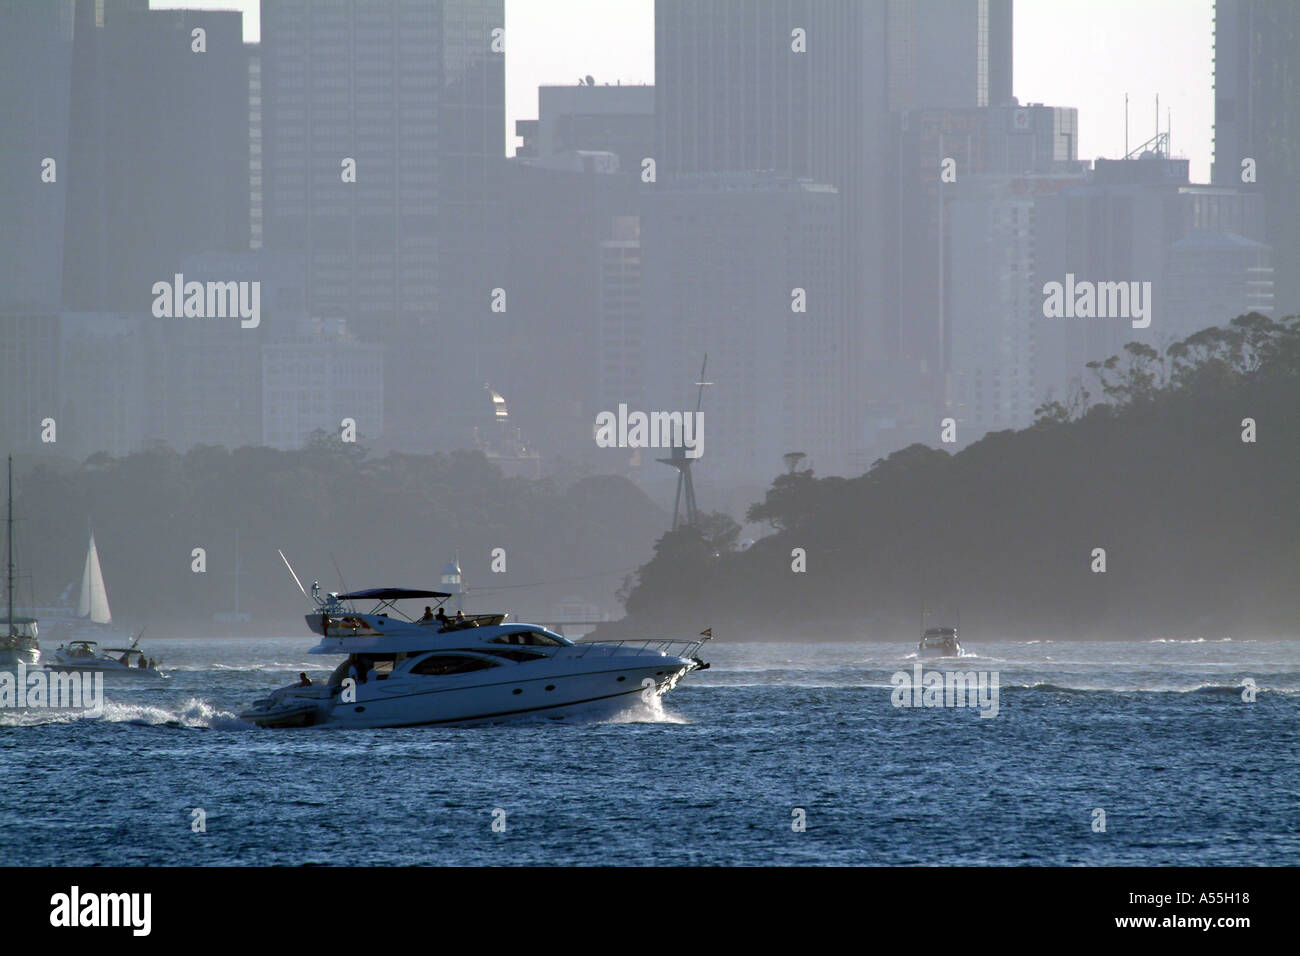 Sydney Harbour Sceneic with boat Stock Photo